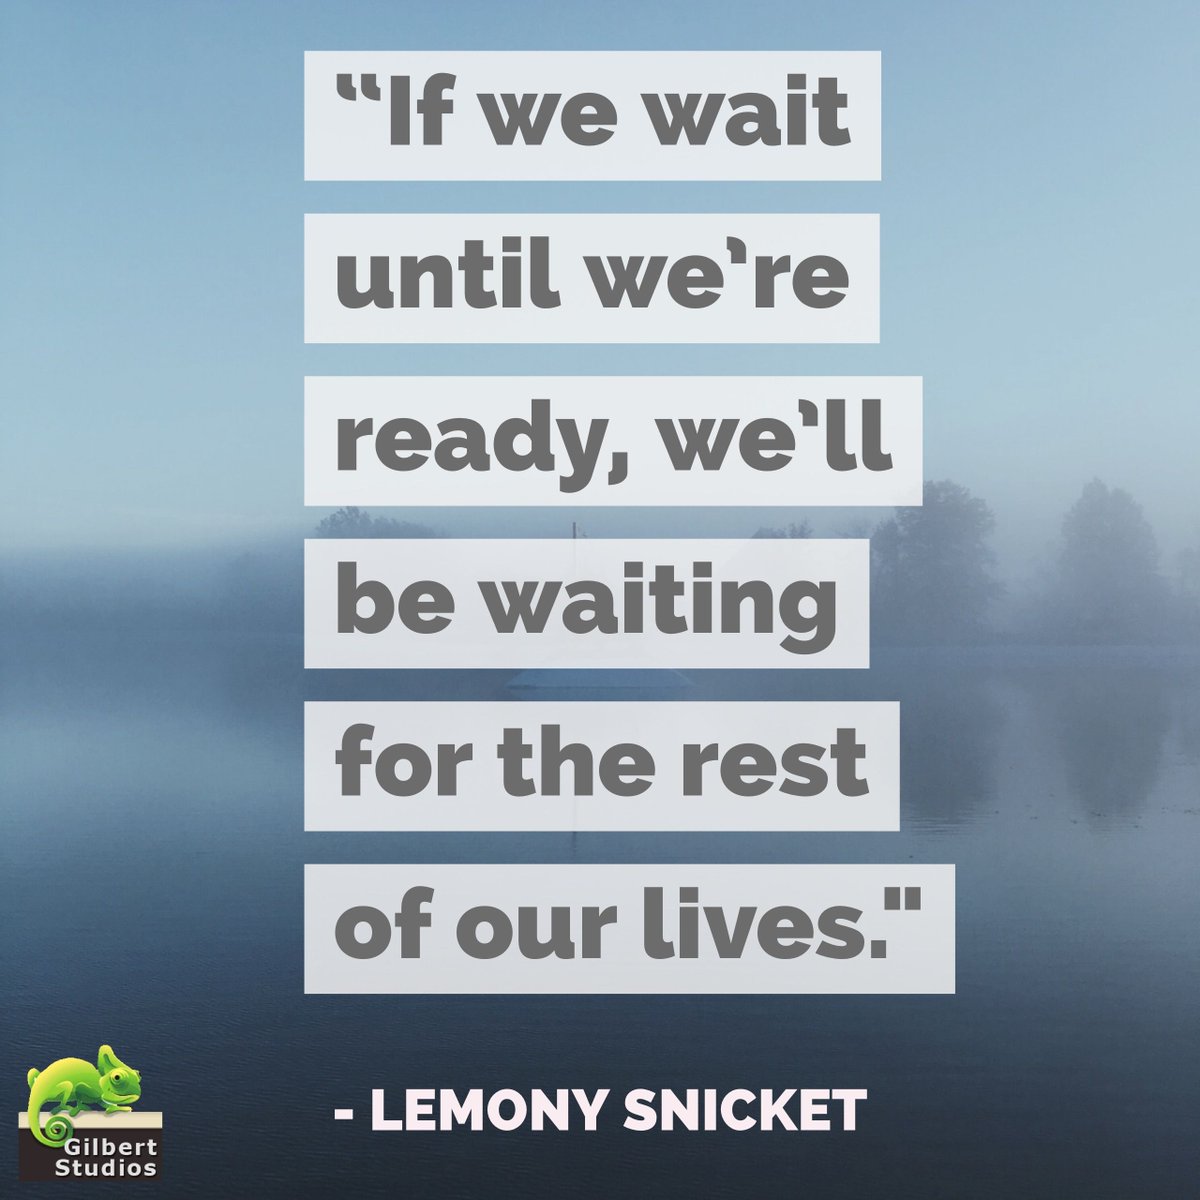 “If we wait until we’re ready, we’ll be waiting for the rest of our lives.” - Lemony Snicket #quote #MotivationMonday #smallbusiness #businesstips #business101 #entrepreneur #marketing #networking #virtualevents